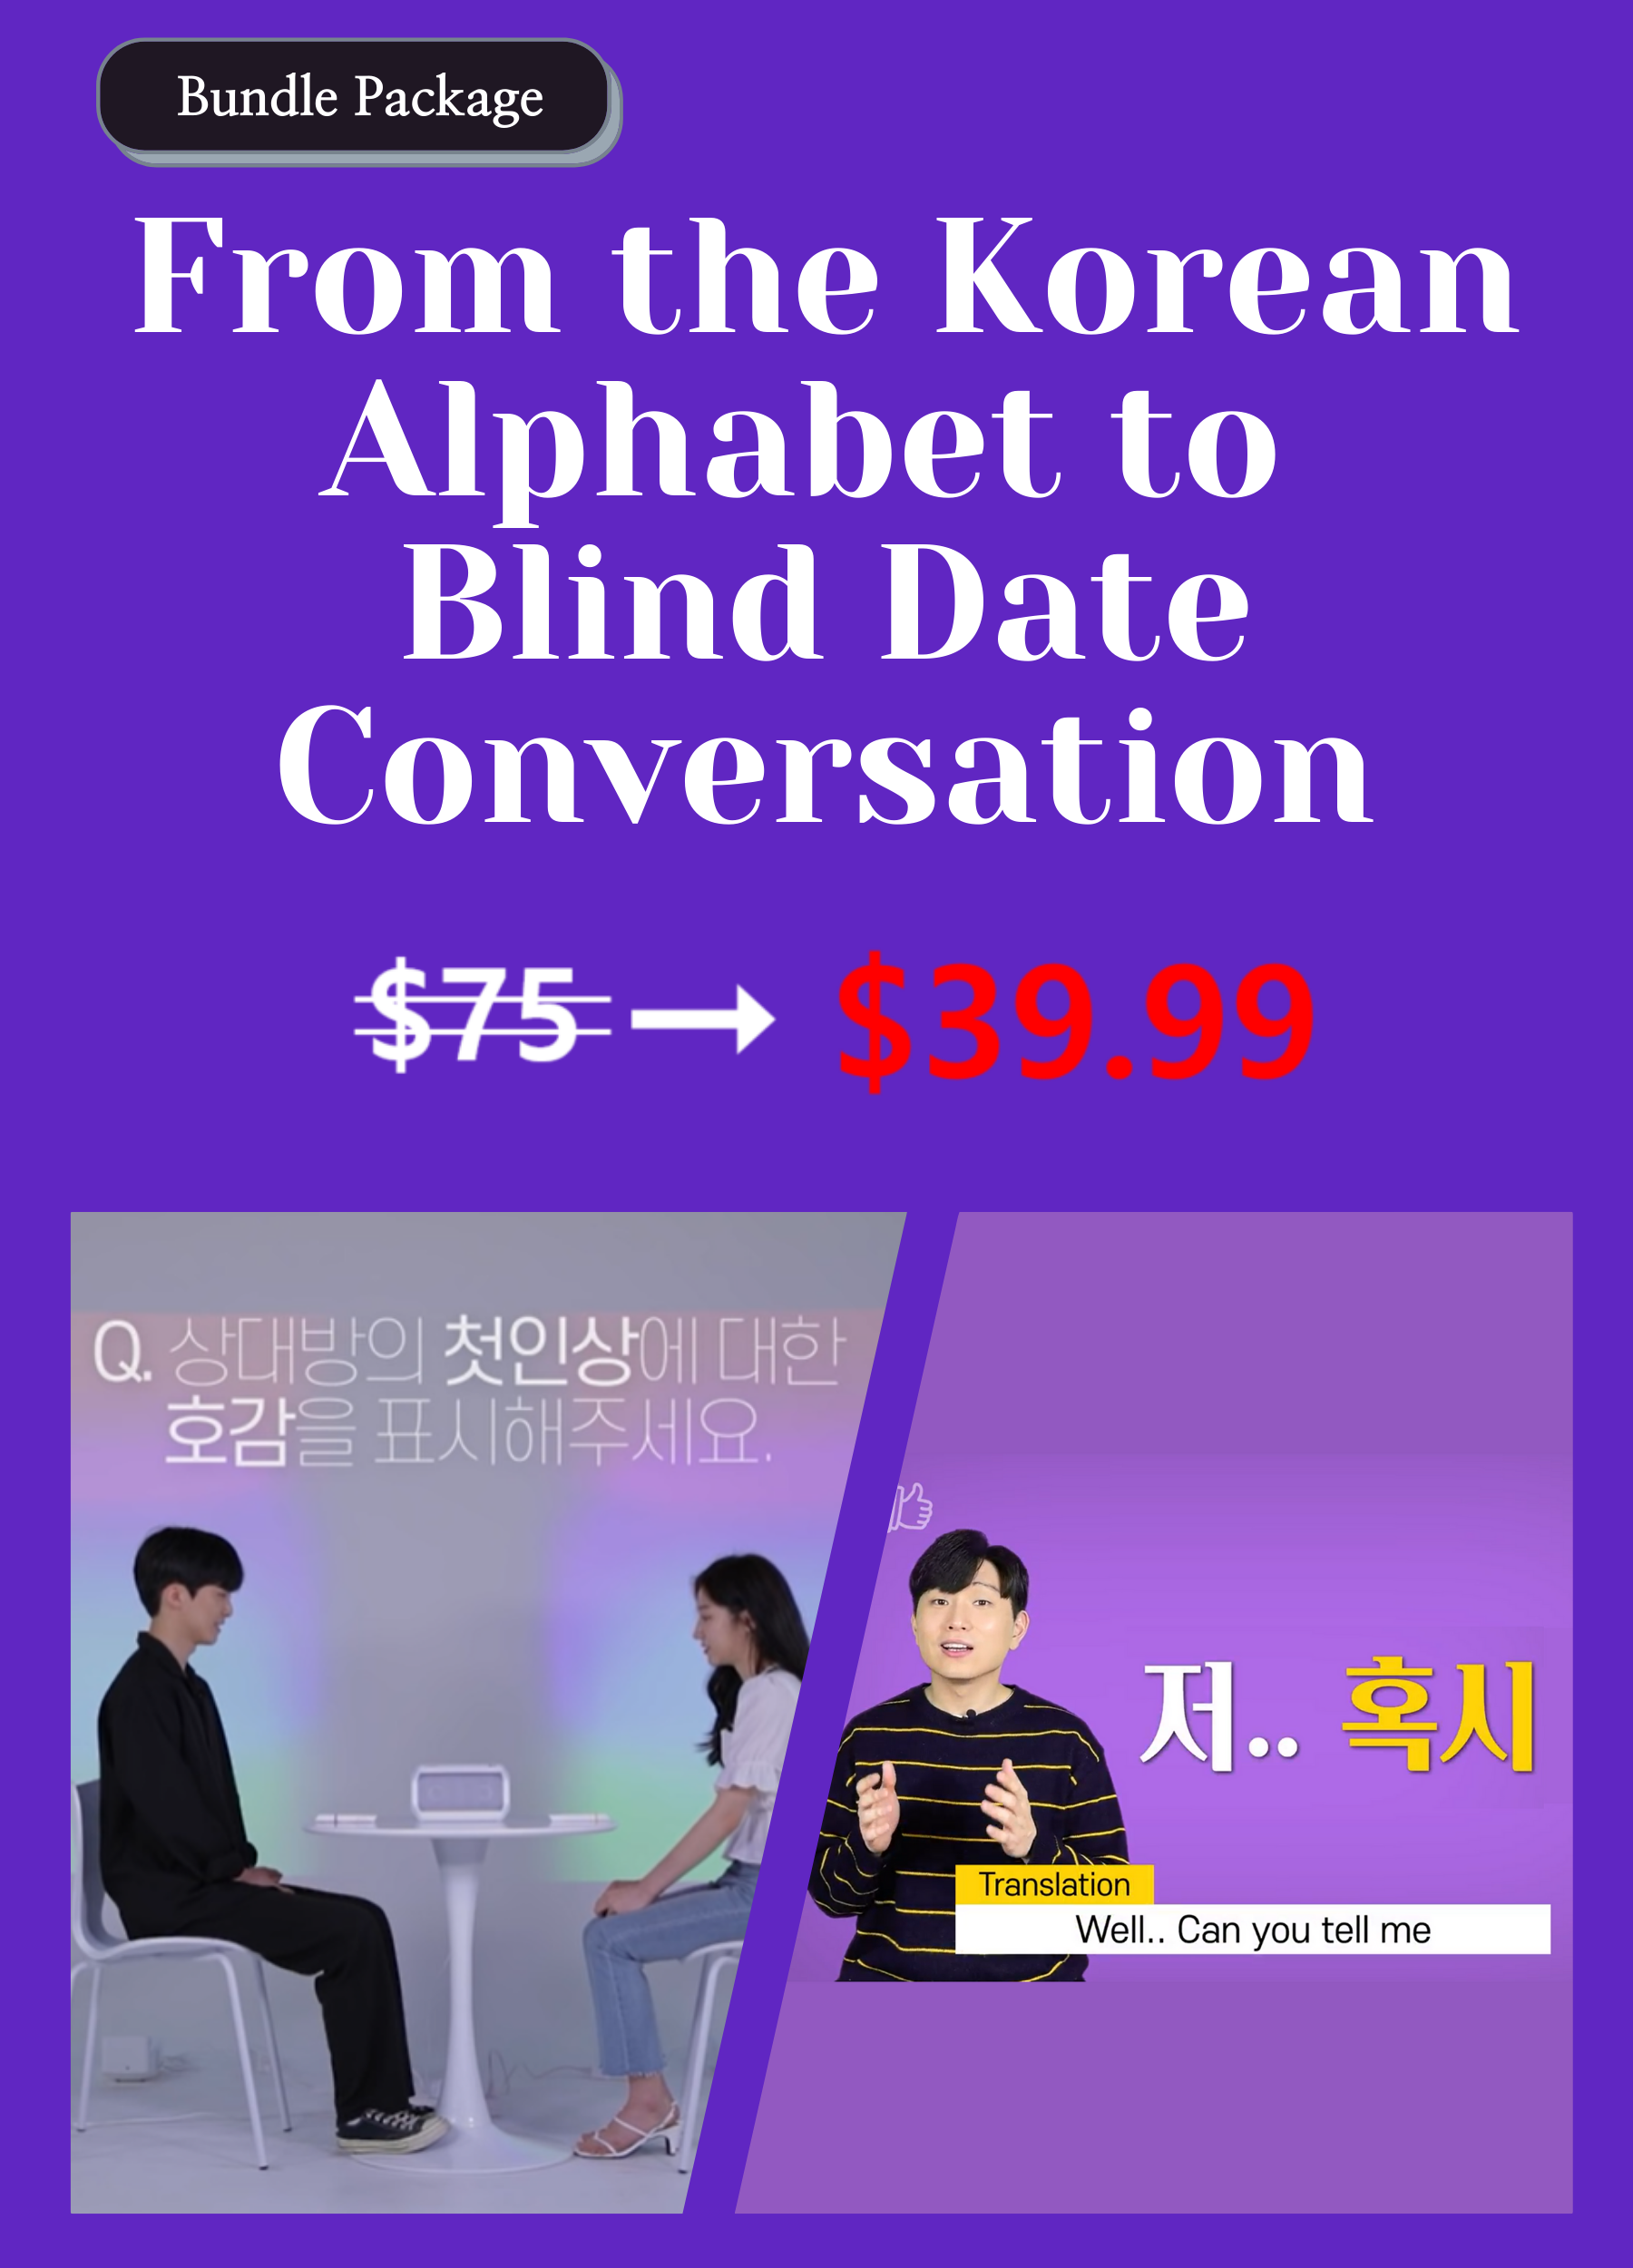 Learning Korean with blind date video.